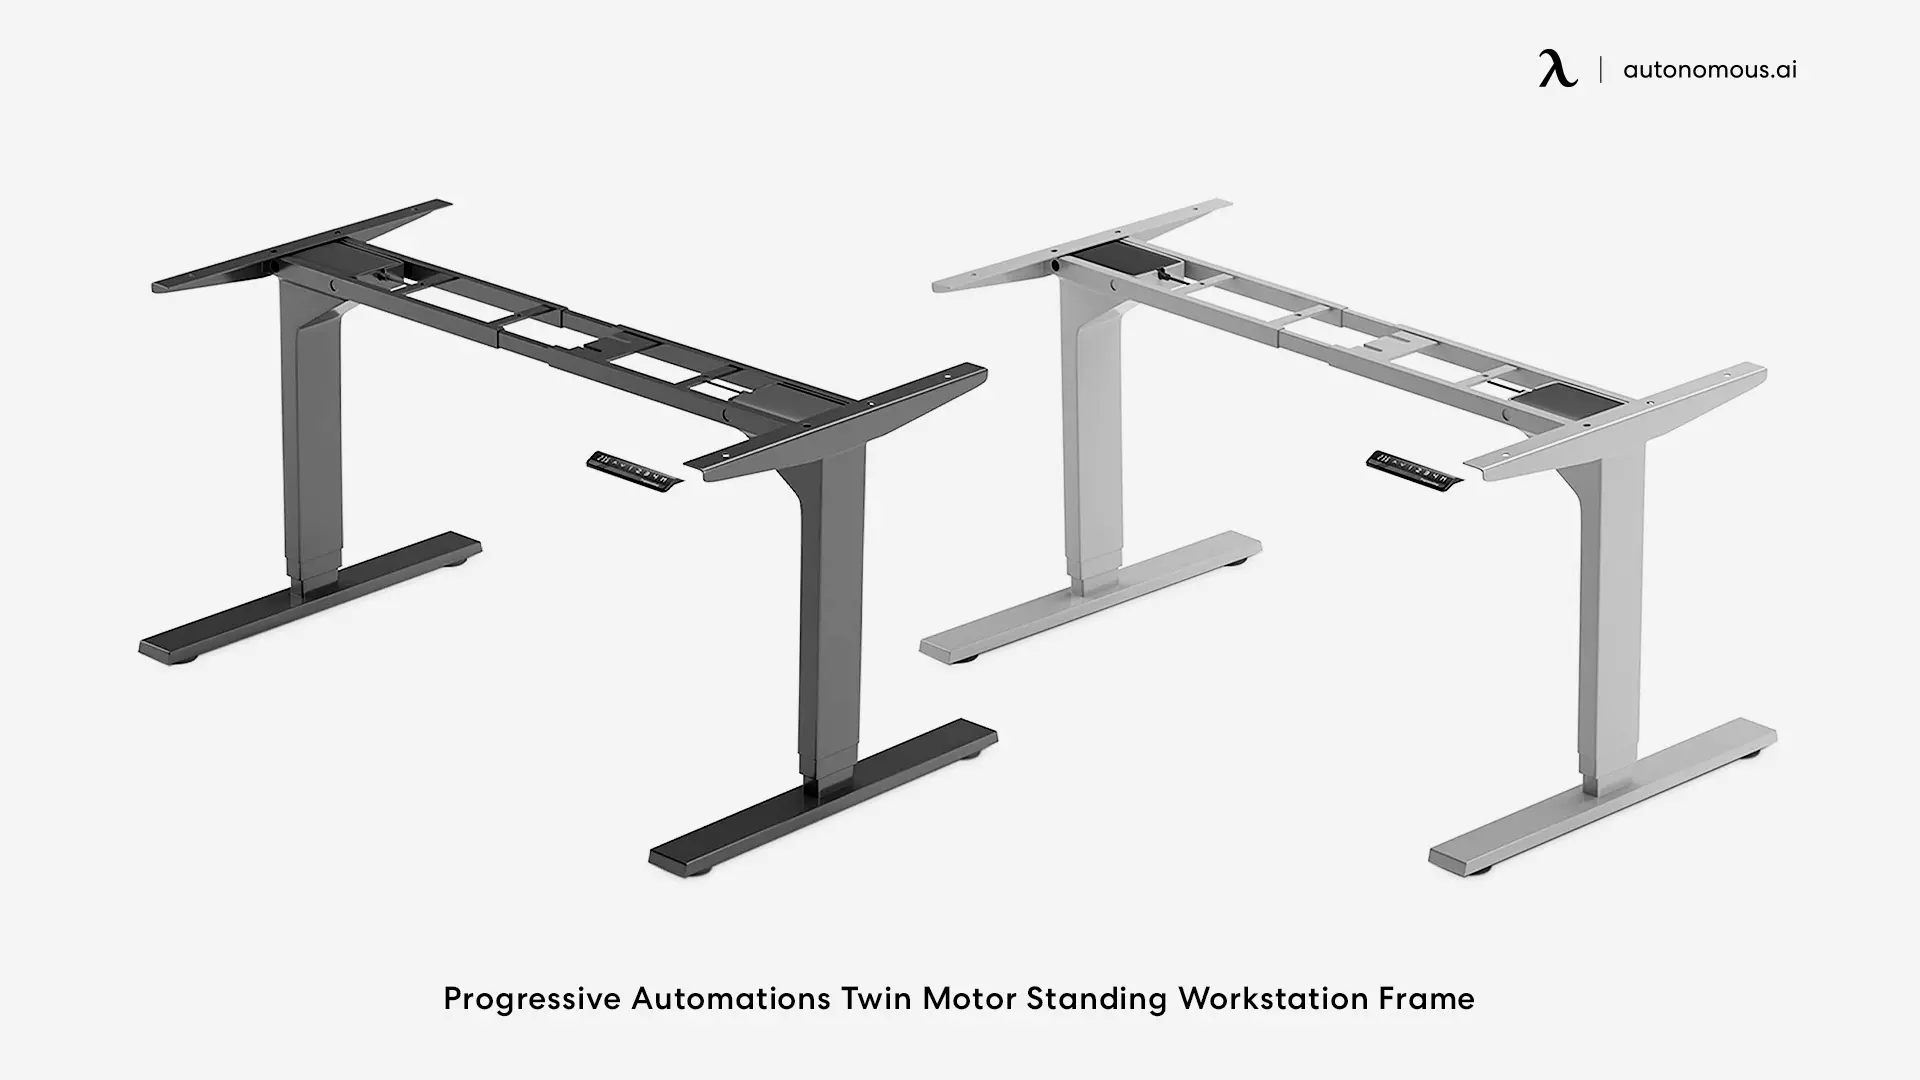 Progressive Automations Twin Motor Standing Workstation Frame